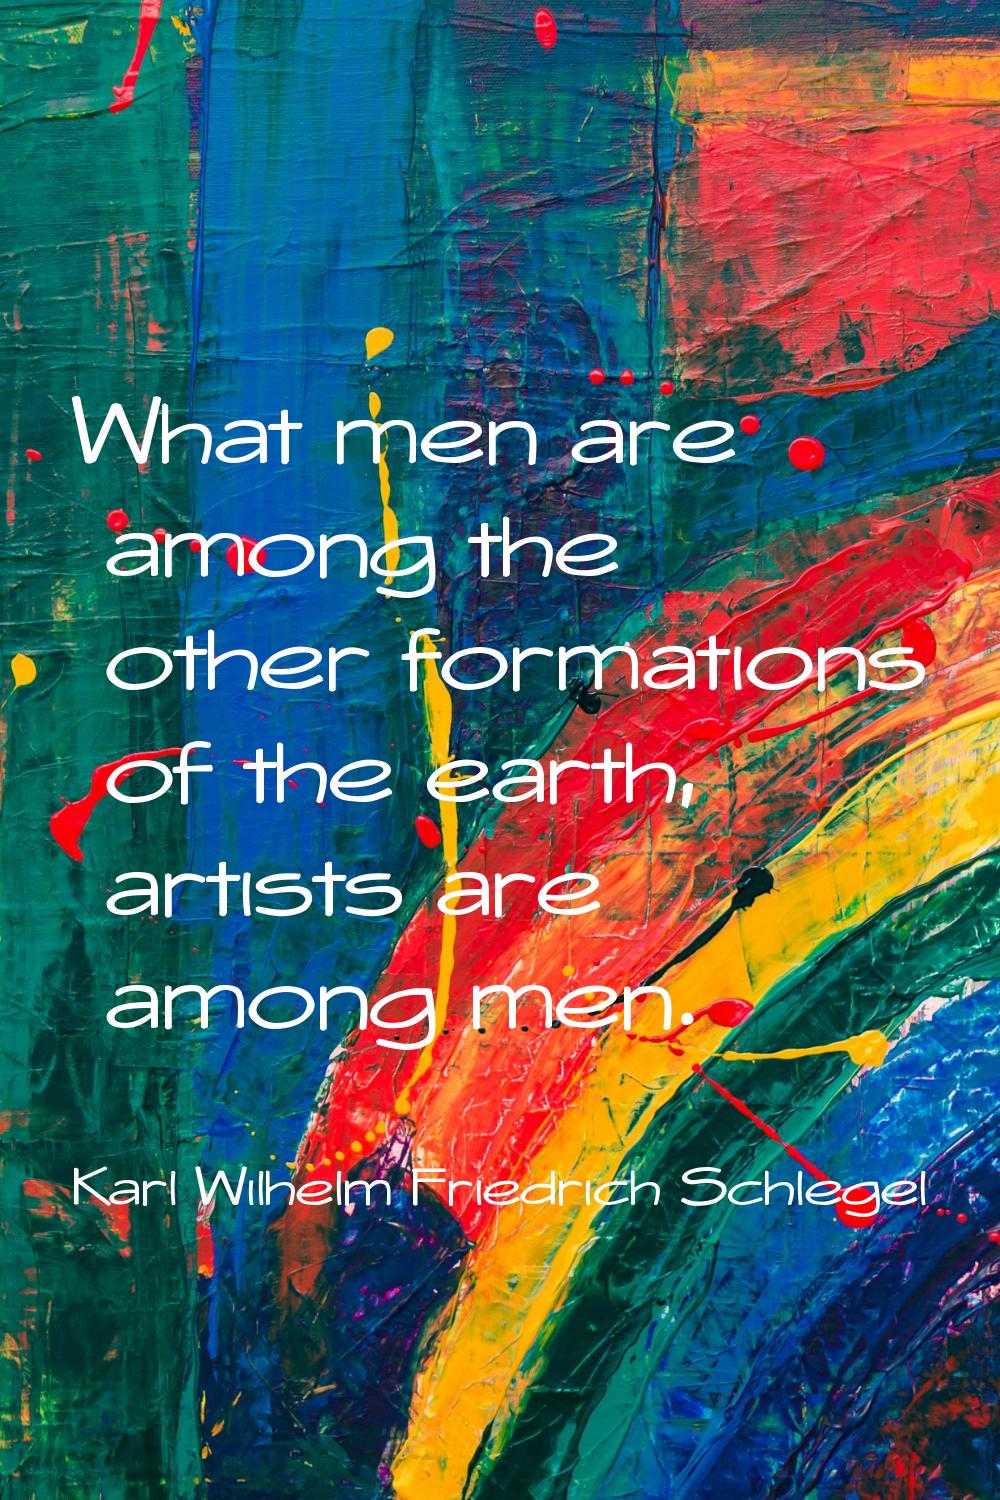 What men are among the other formations of the earth, artists are among men.